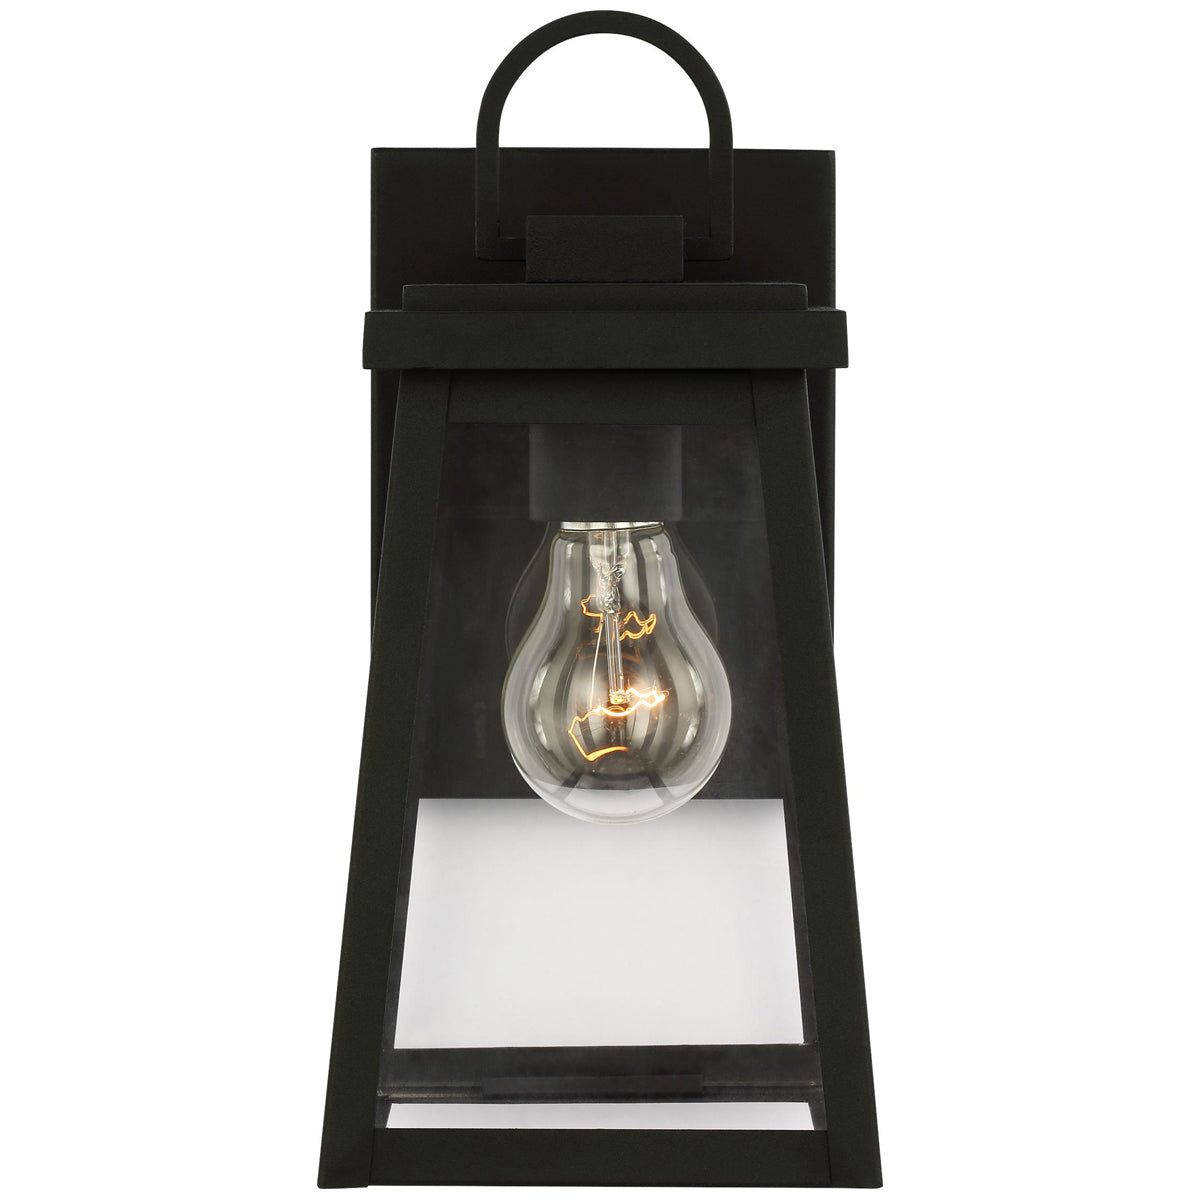 Sea Gull Lighting Founders Small 1-Light Wall Lantern without Bulb